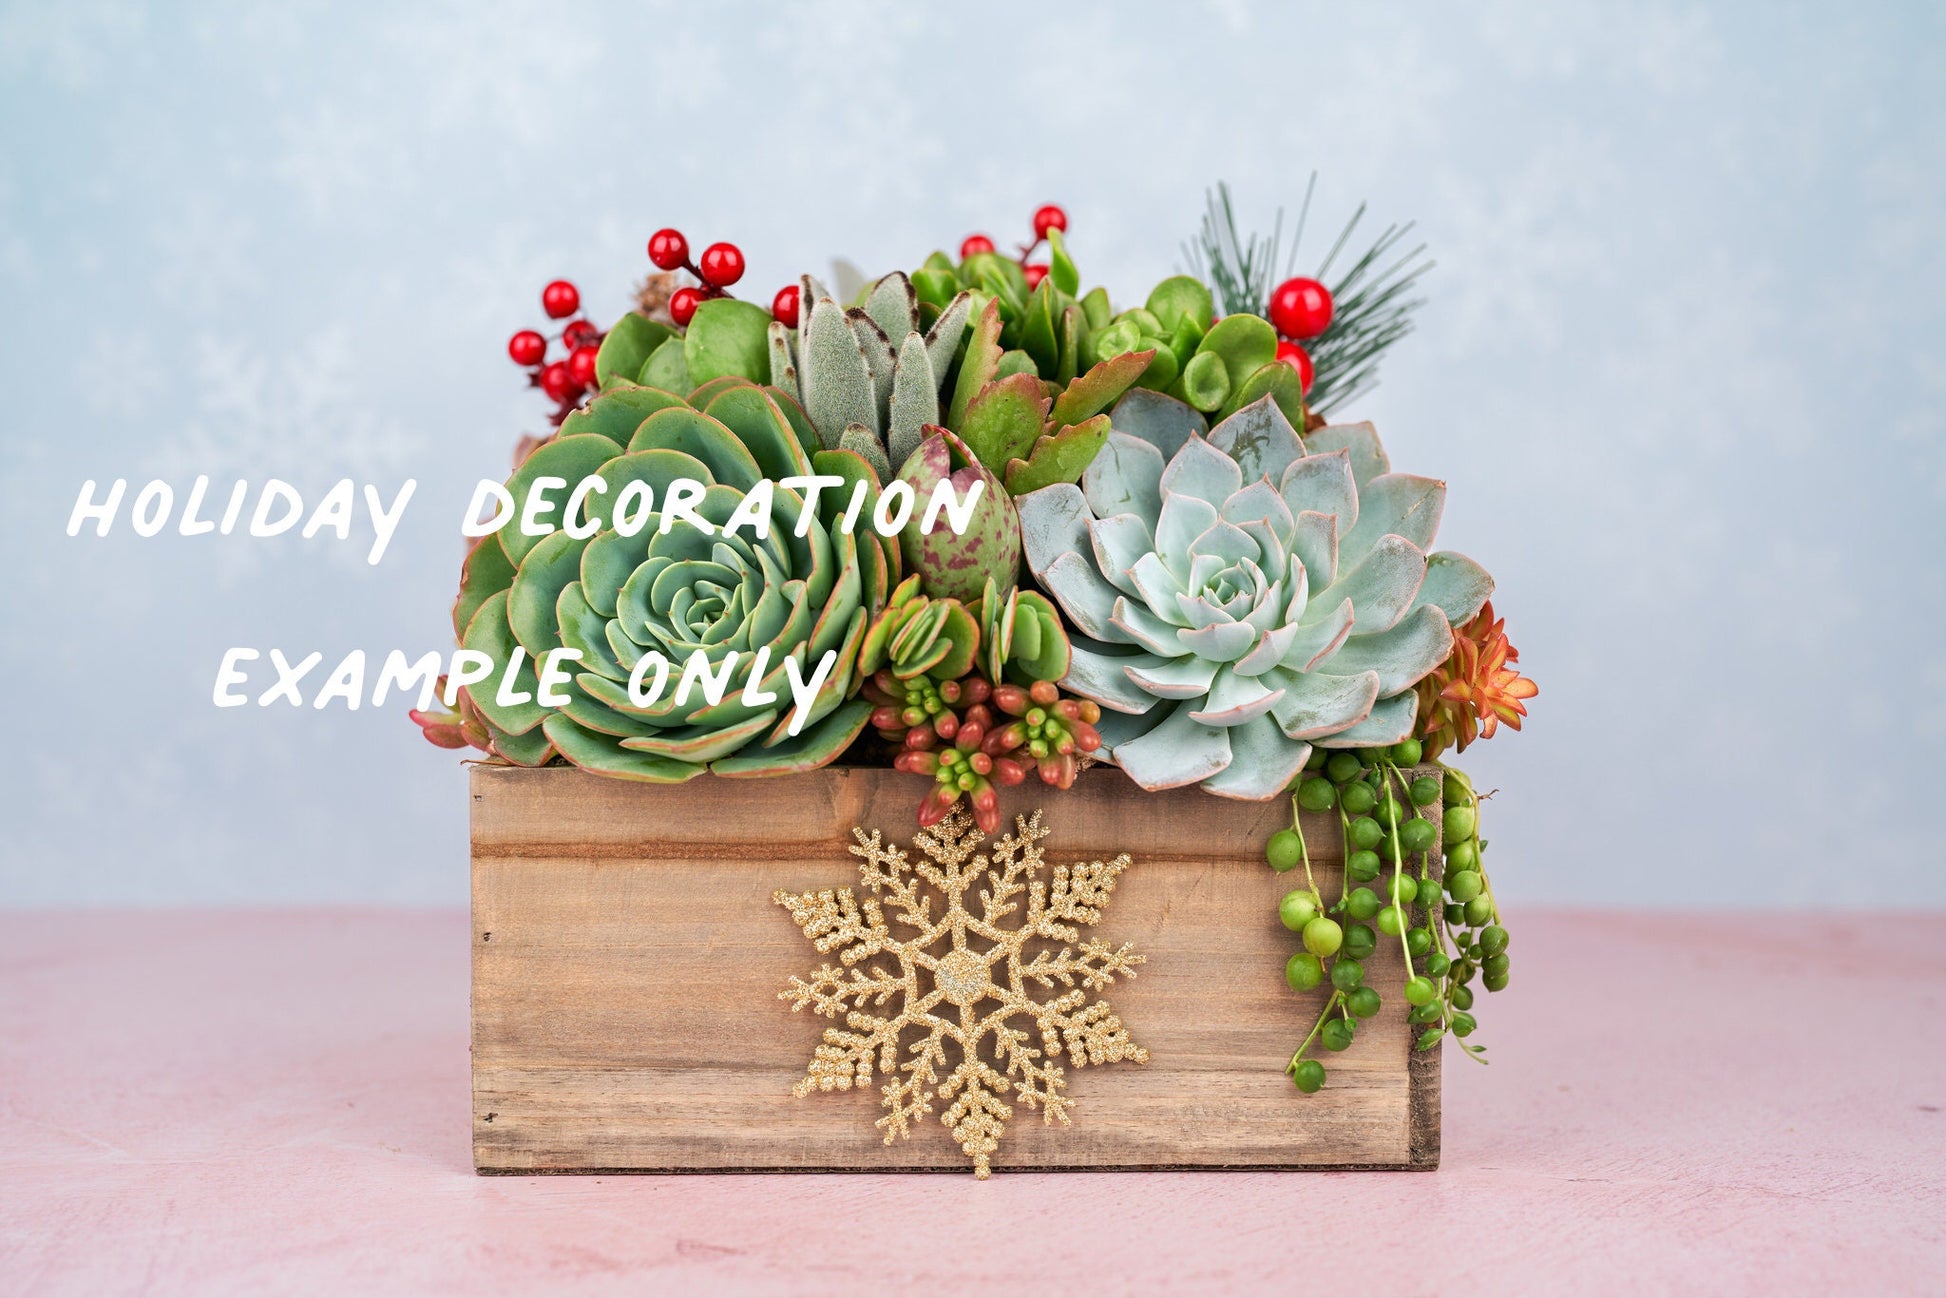 Christmas-Holiday Decoration Add-on | Add Winter Holiday Festive Decor to any Succulent Arrangement: DESIGNERS CHOICE!